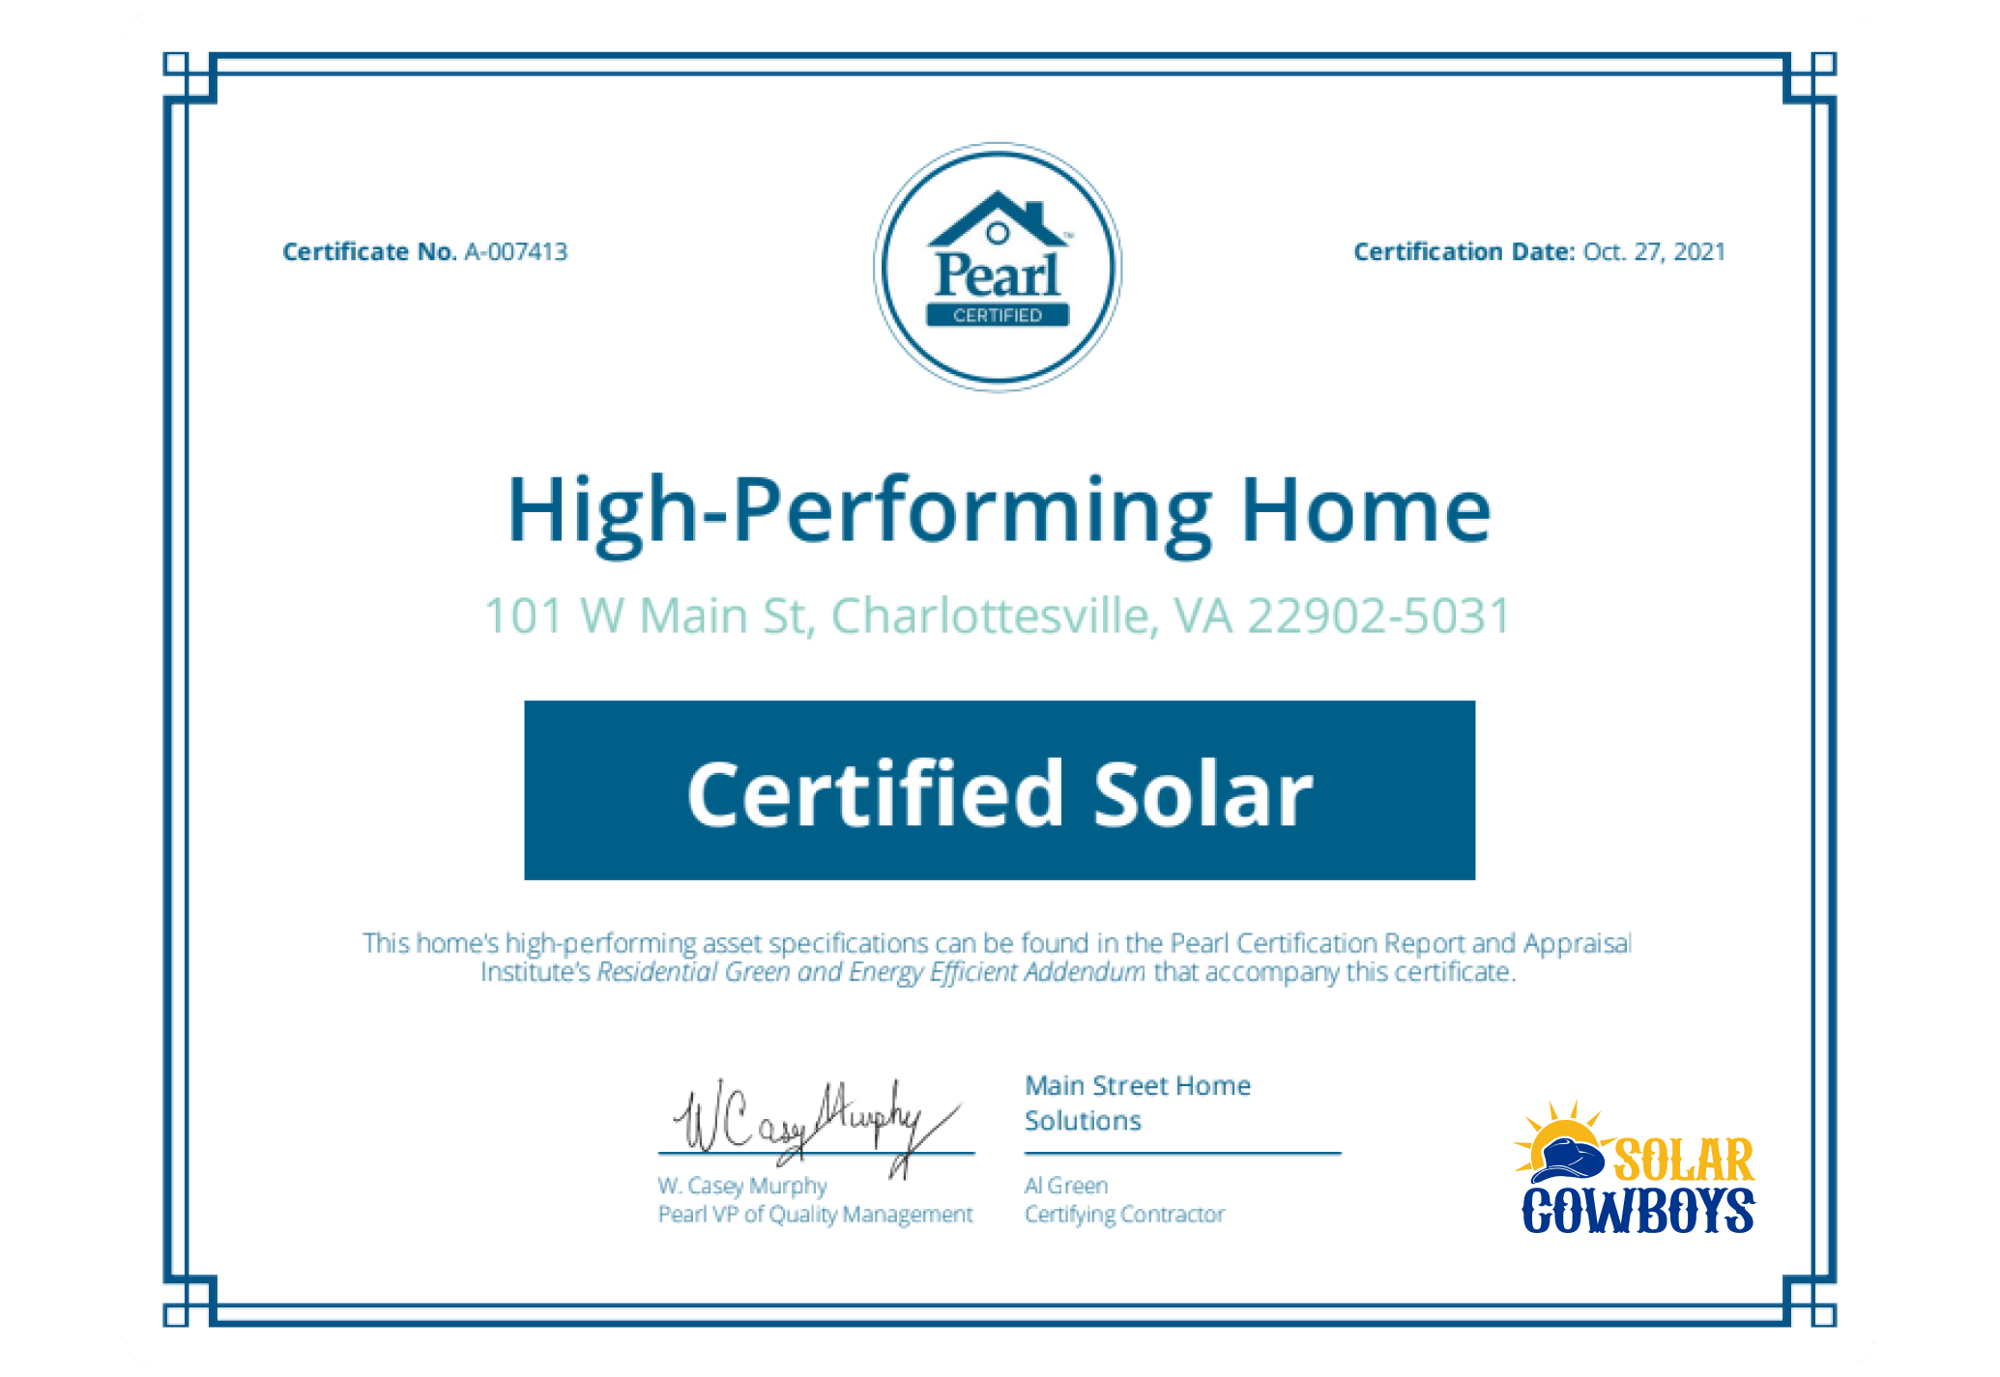 The Solar Cowboys: Pearl certification installation